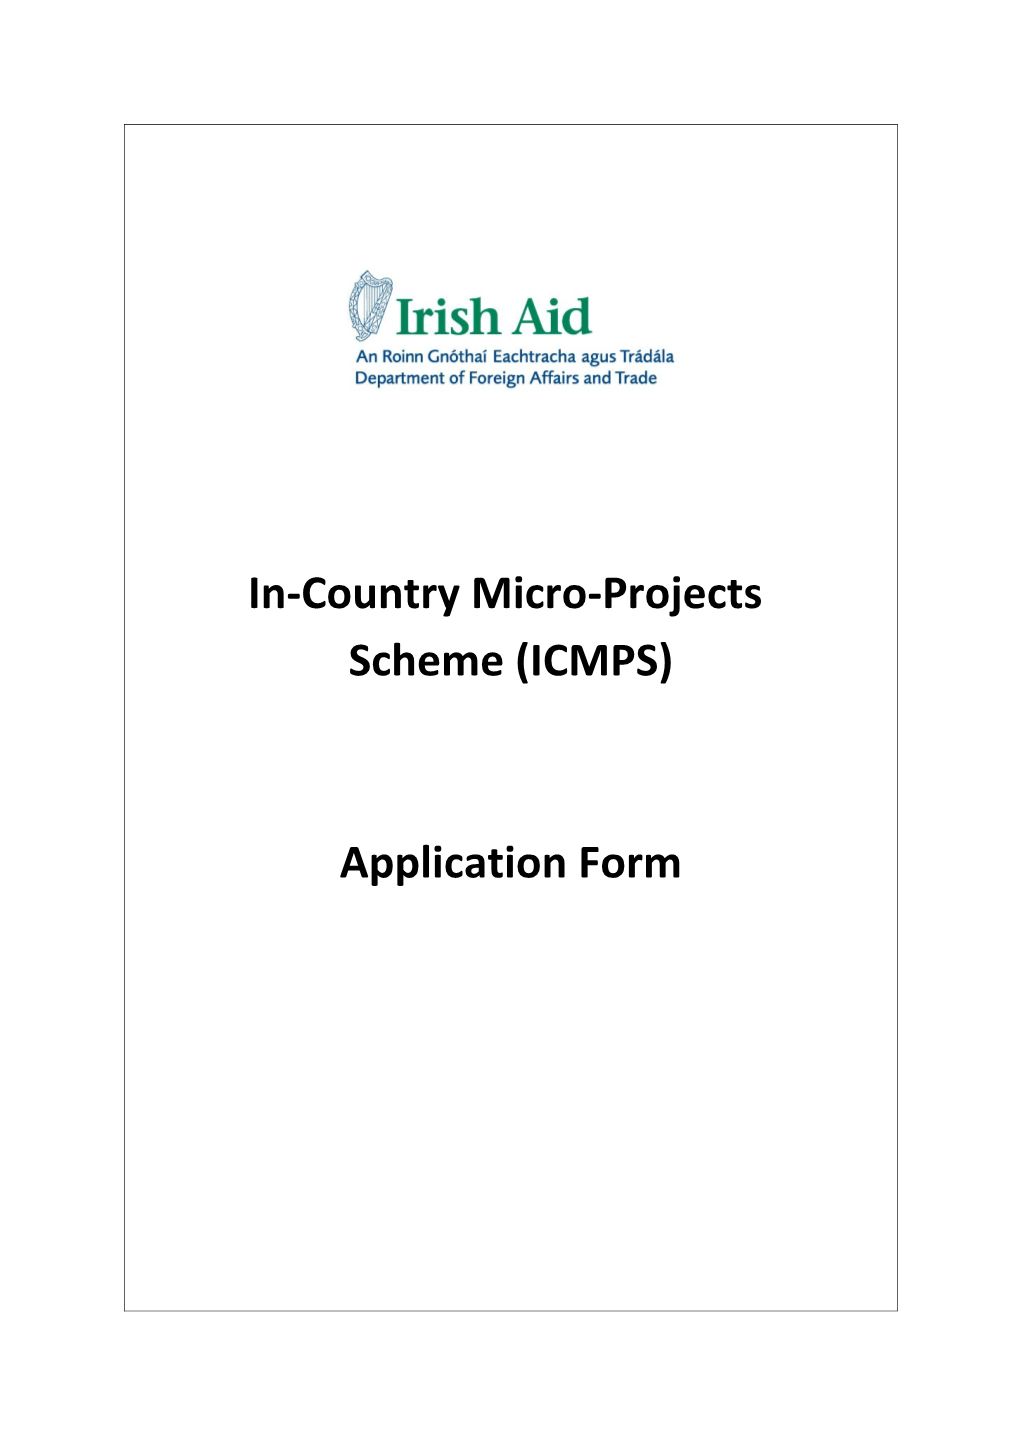 In-Country Micro-Projects